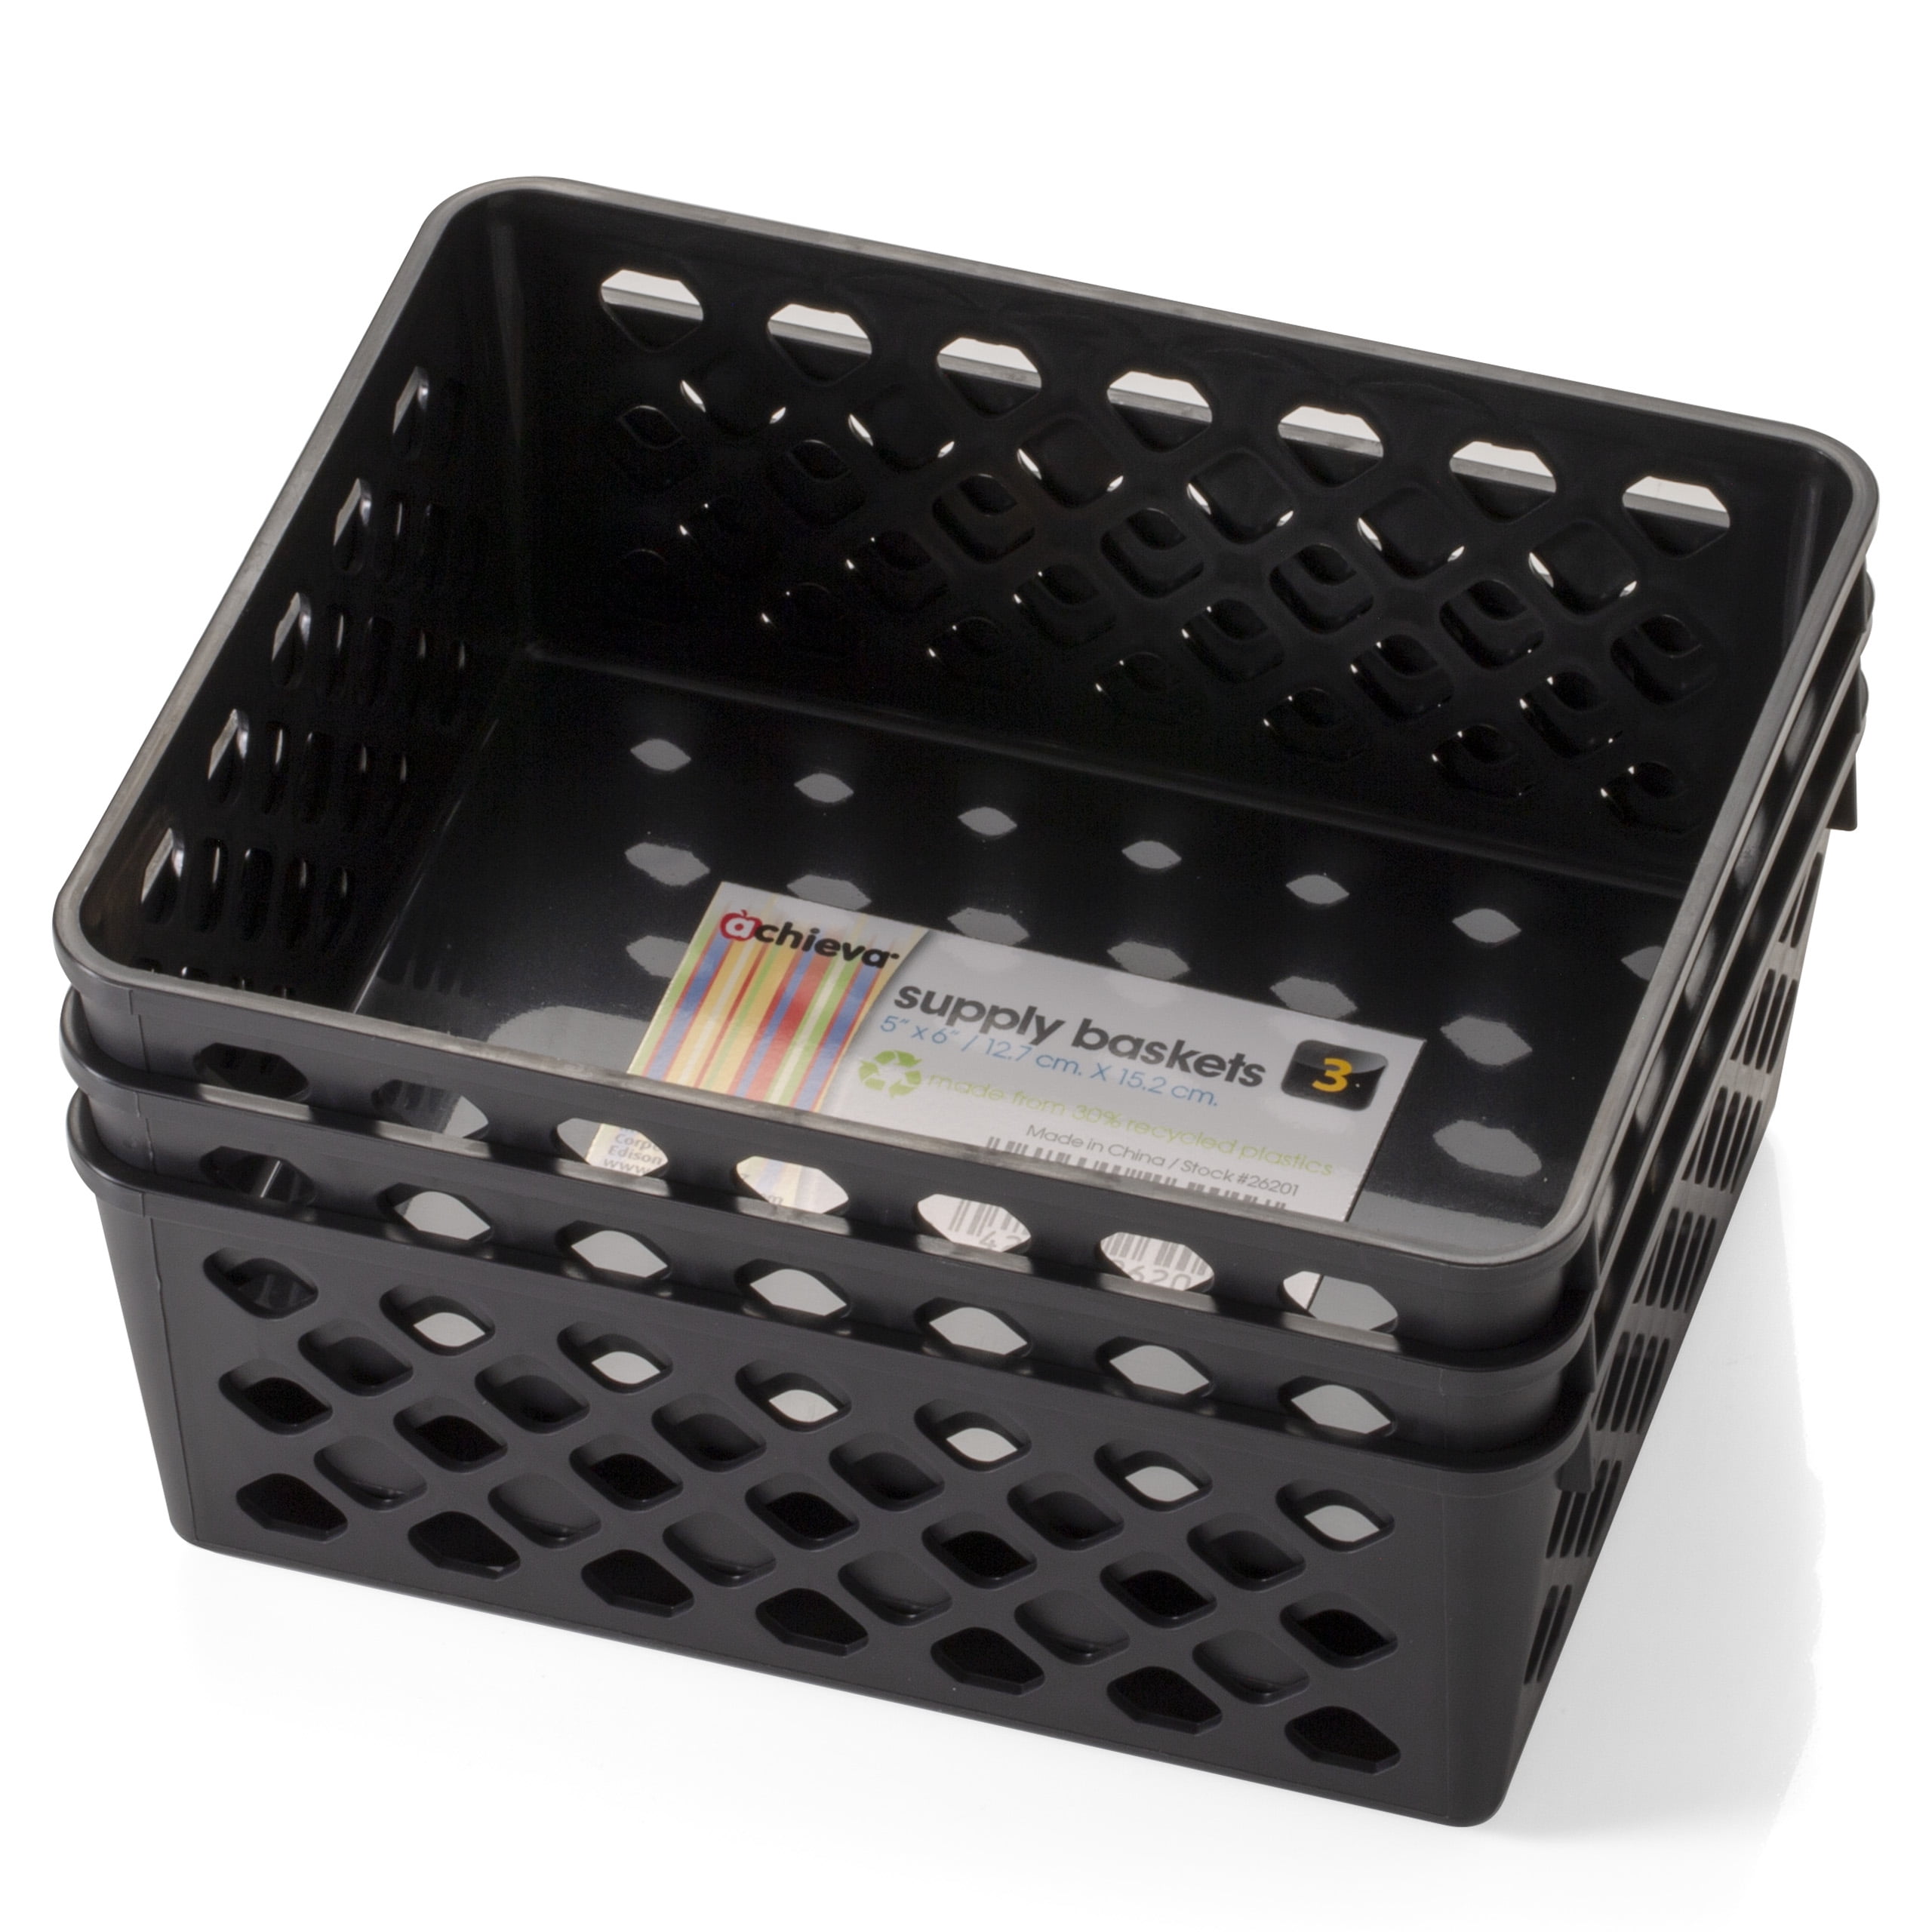 Officemate OIC Achieva Medium Supply Basket 26201 Black Pack of 3 Recycled 